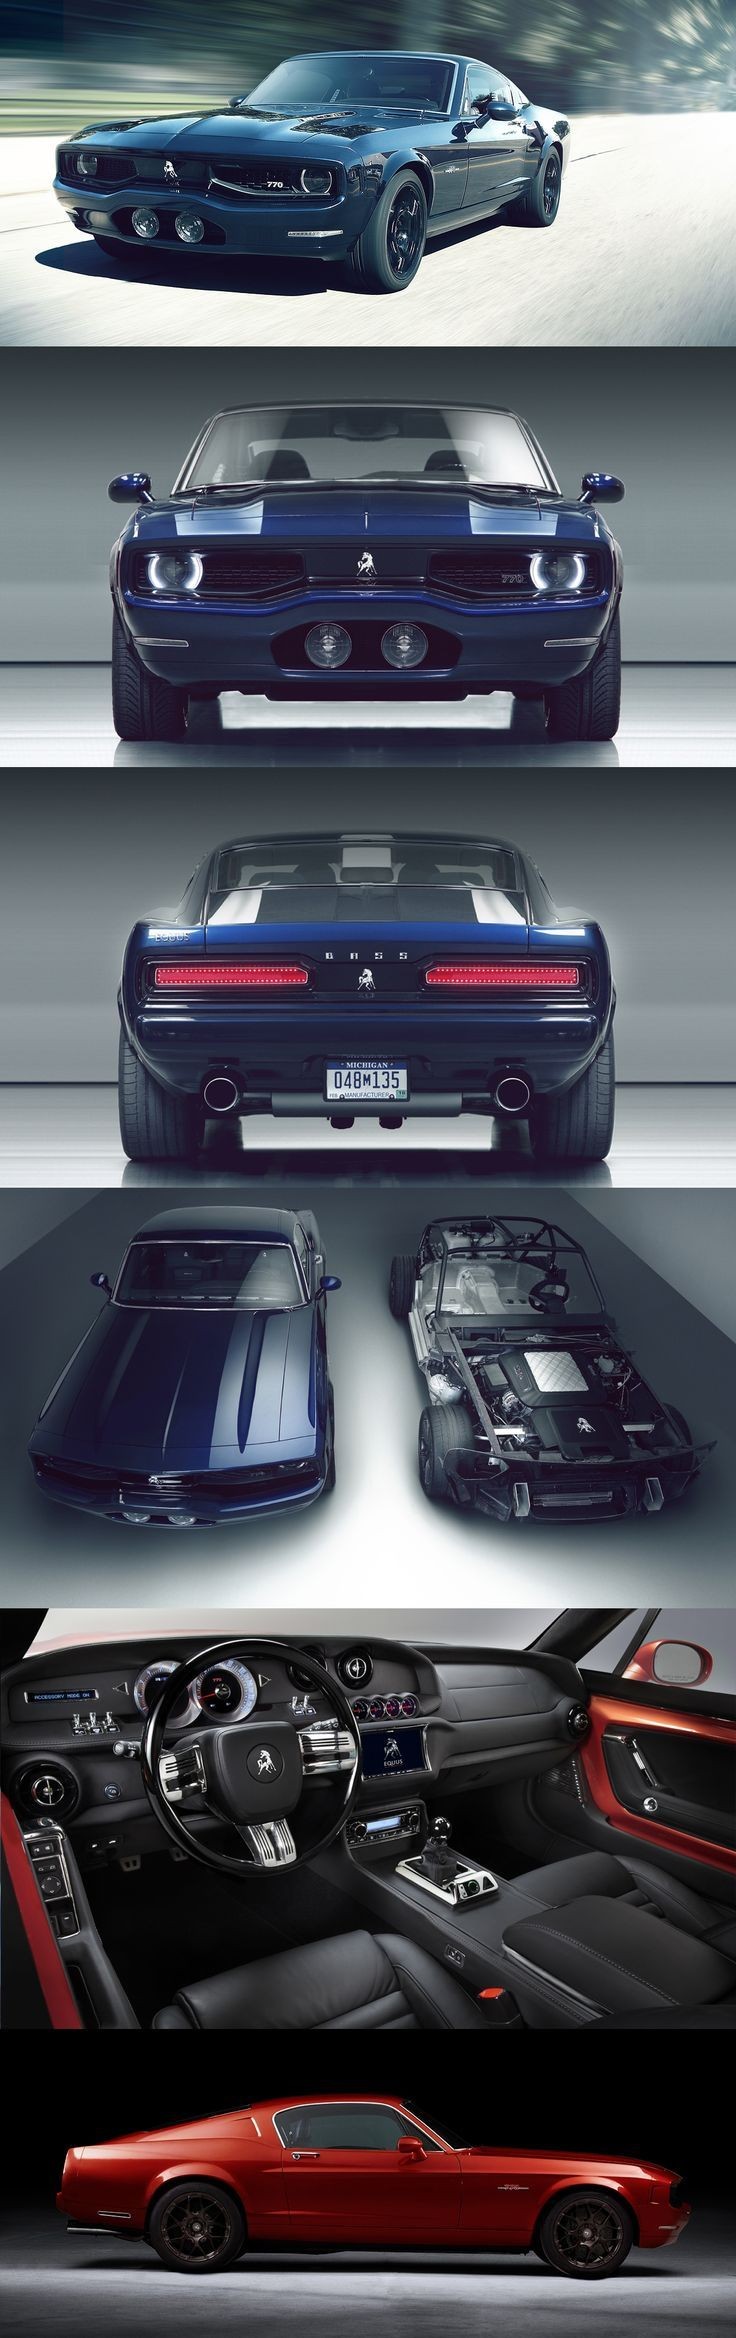 Equus Bass 770: $250,000 Muscle Car For The 21st C...